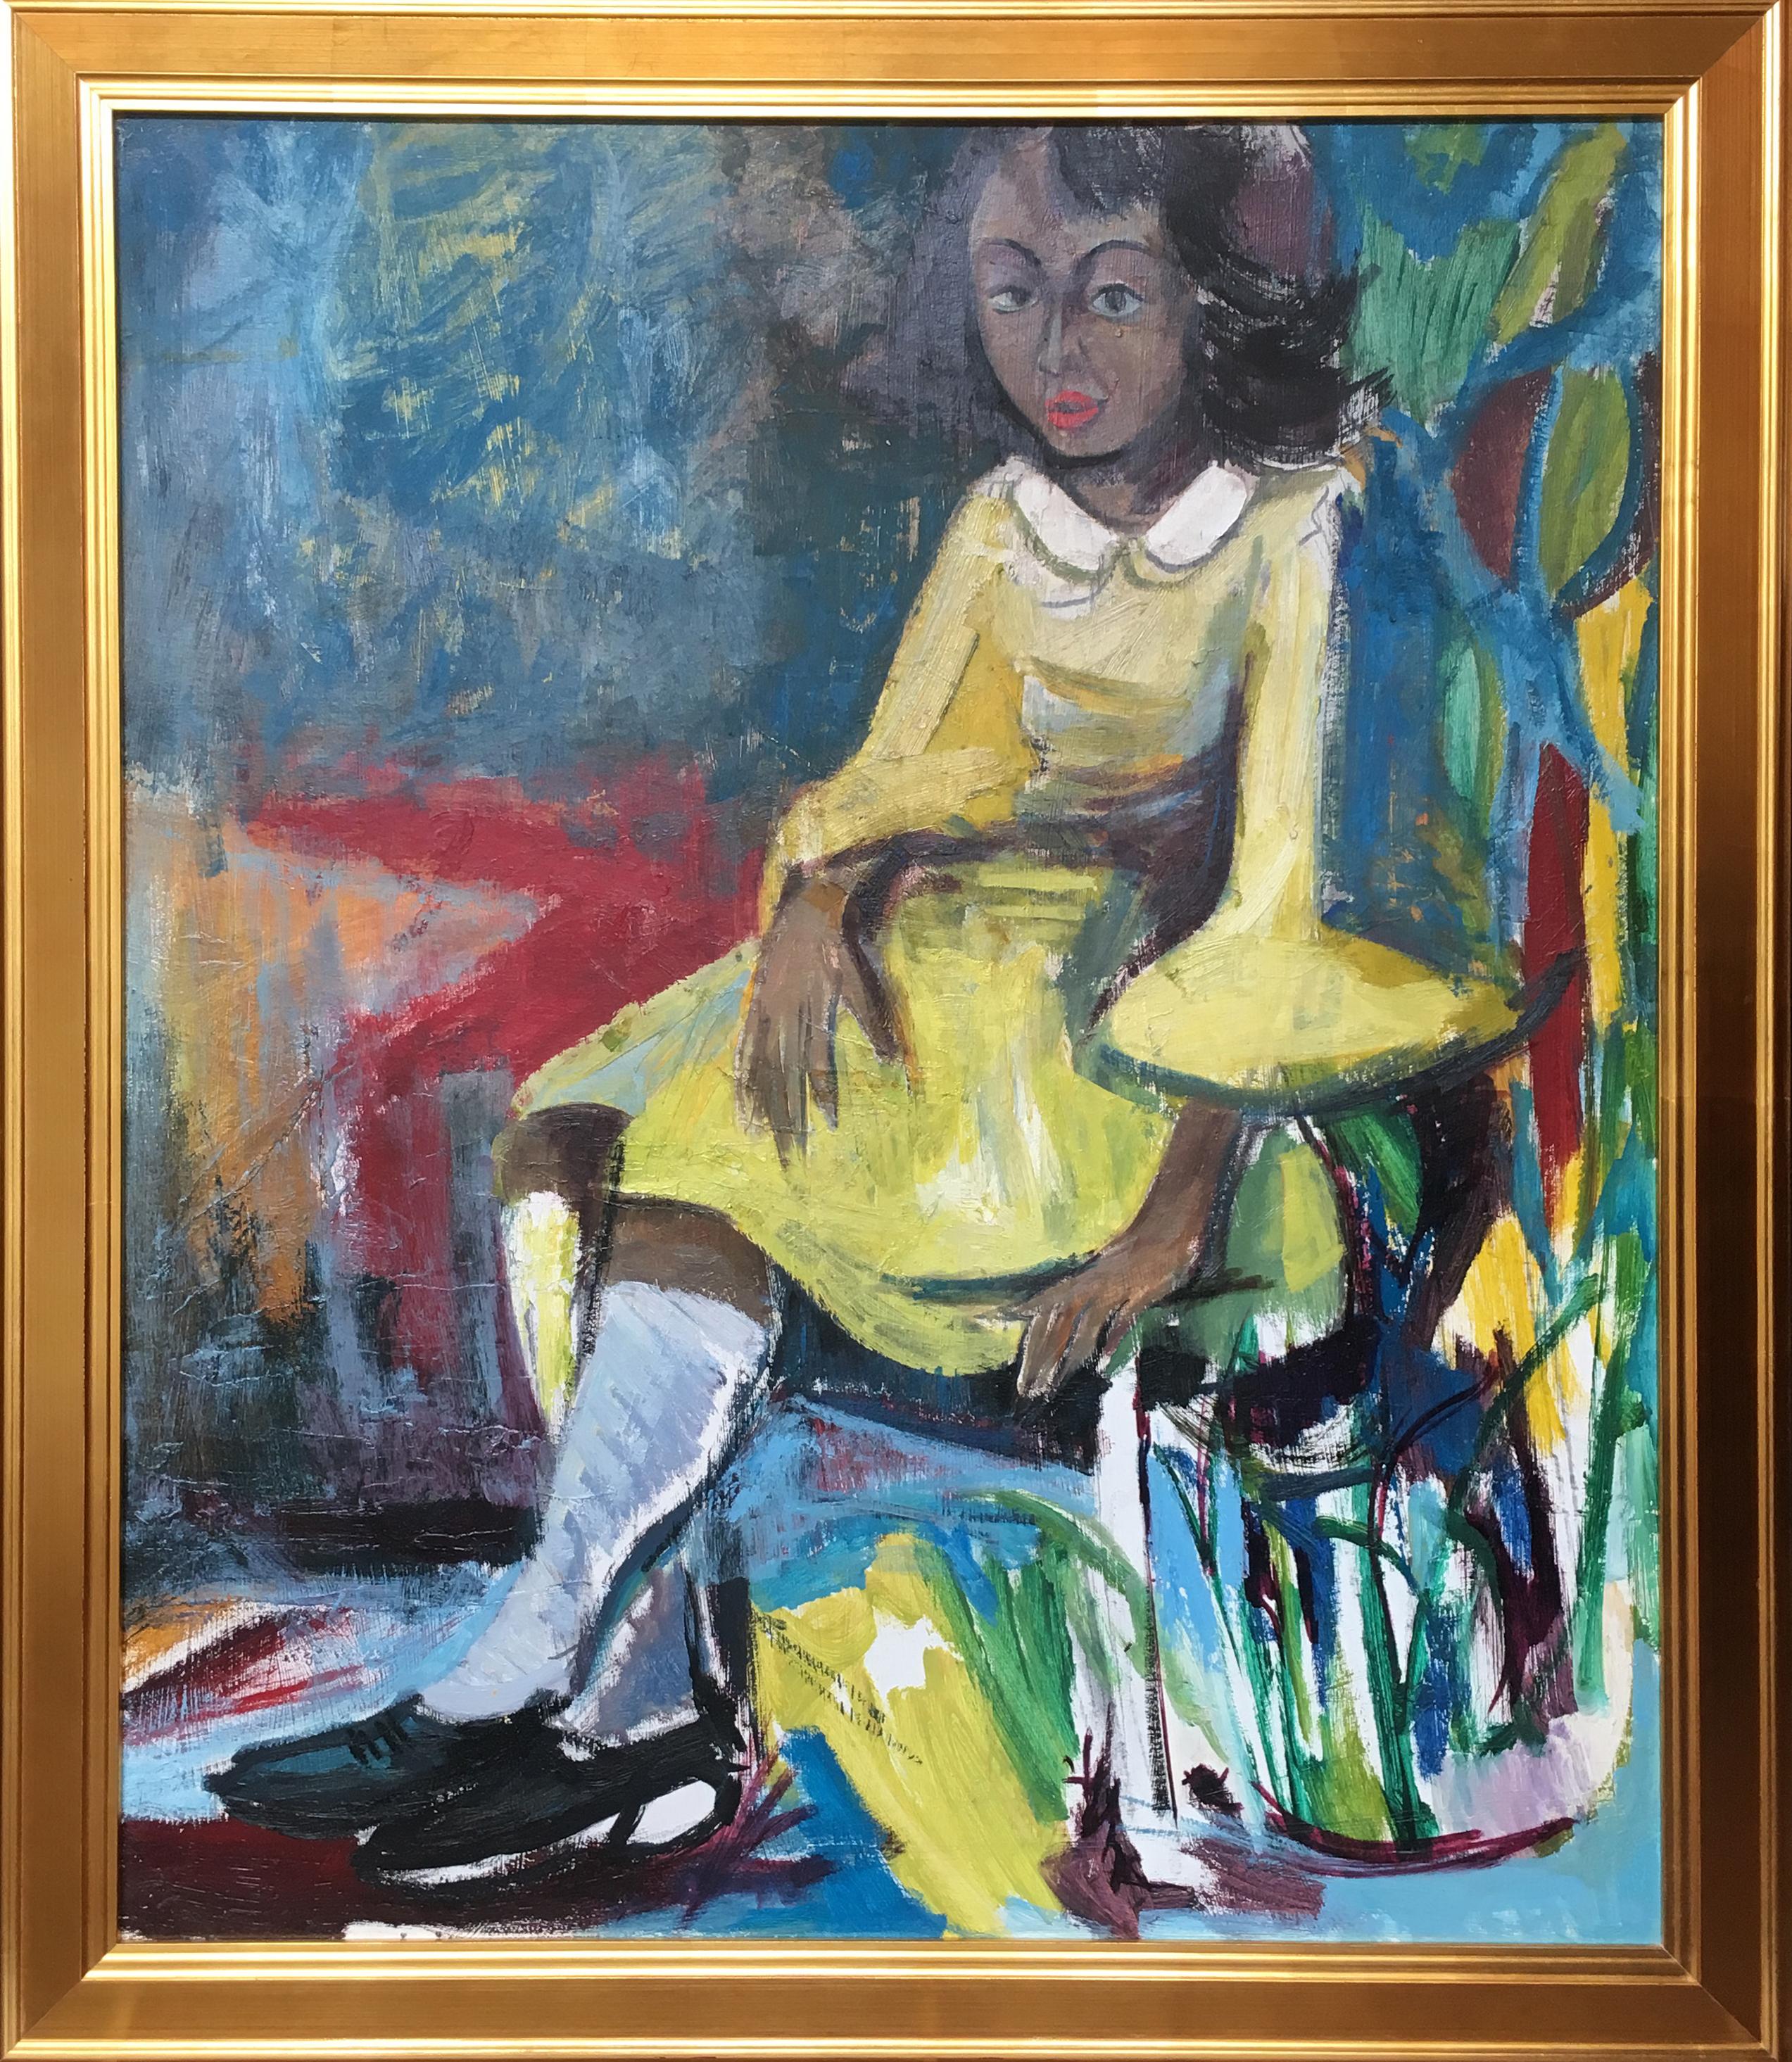 Girl in a Yellow Dress, Portrait in Color, Oil on Board, African American Art - Painting by Bernard Harmon